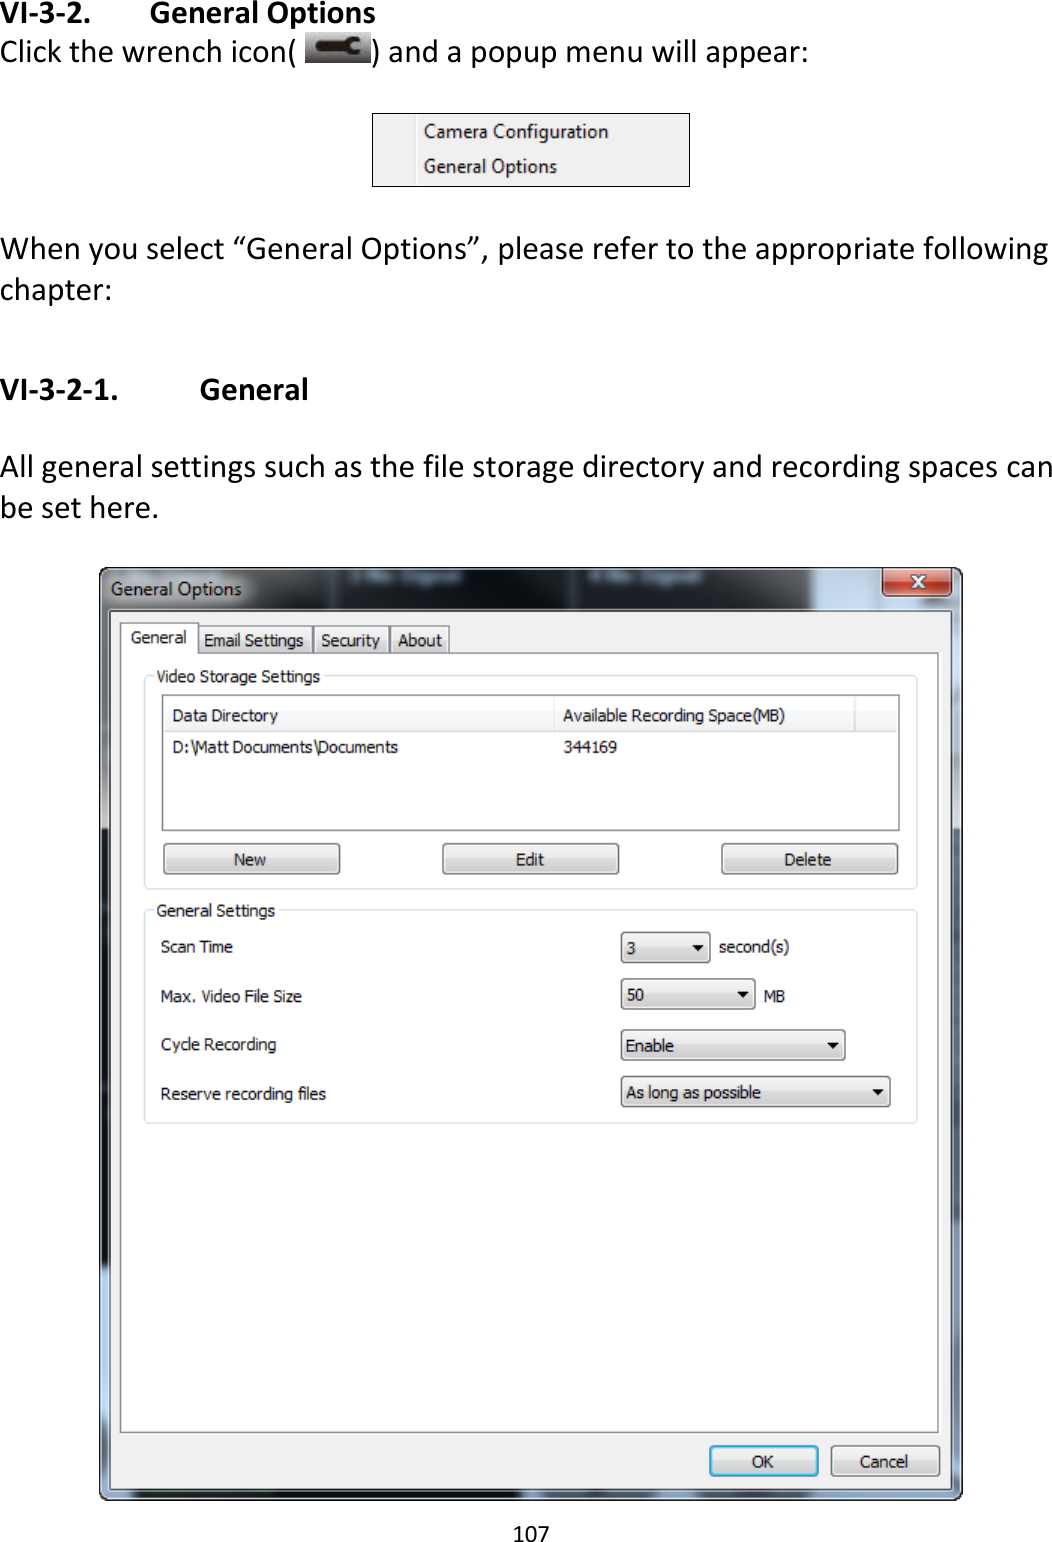 107  VI-3-2.   General Options Click the wrench icon(  ) and a popup menu will appear:    When you select “General Options”, please refer to the appropriate following chapter:  VI-3-2-1.    General  All general settings such as the file storage directory and recording spaces can be set here.   